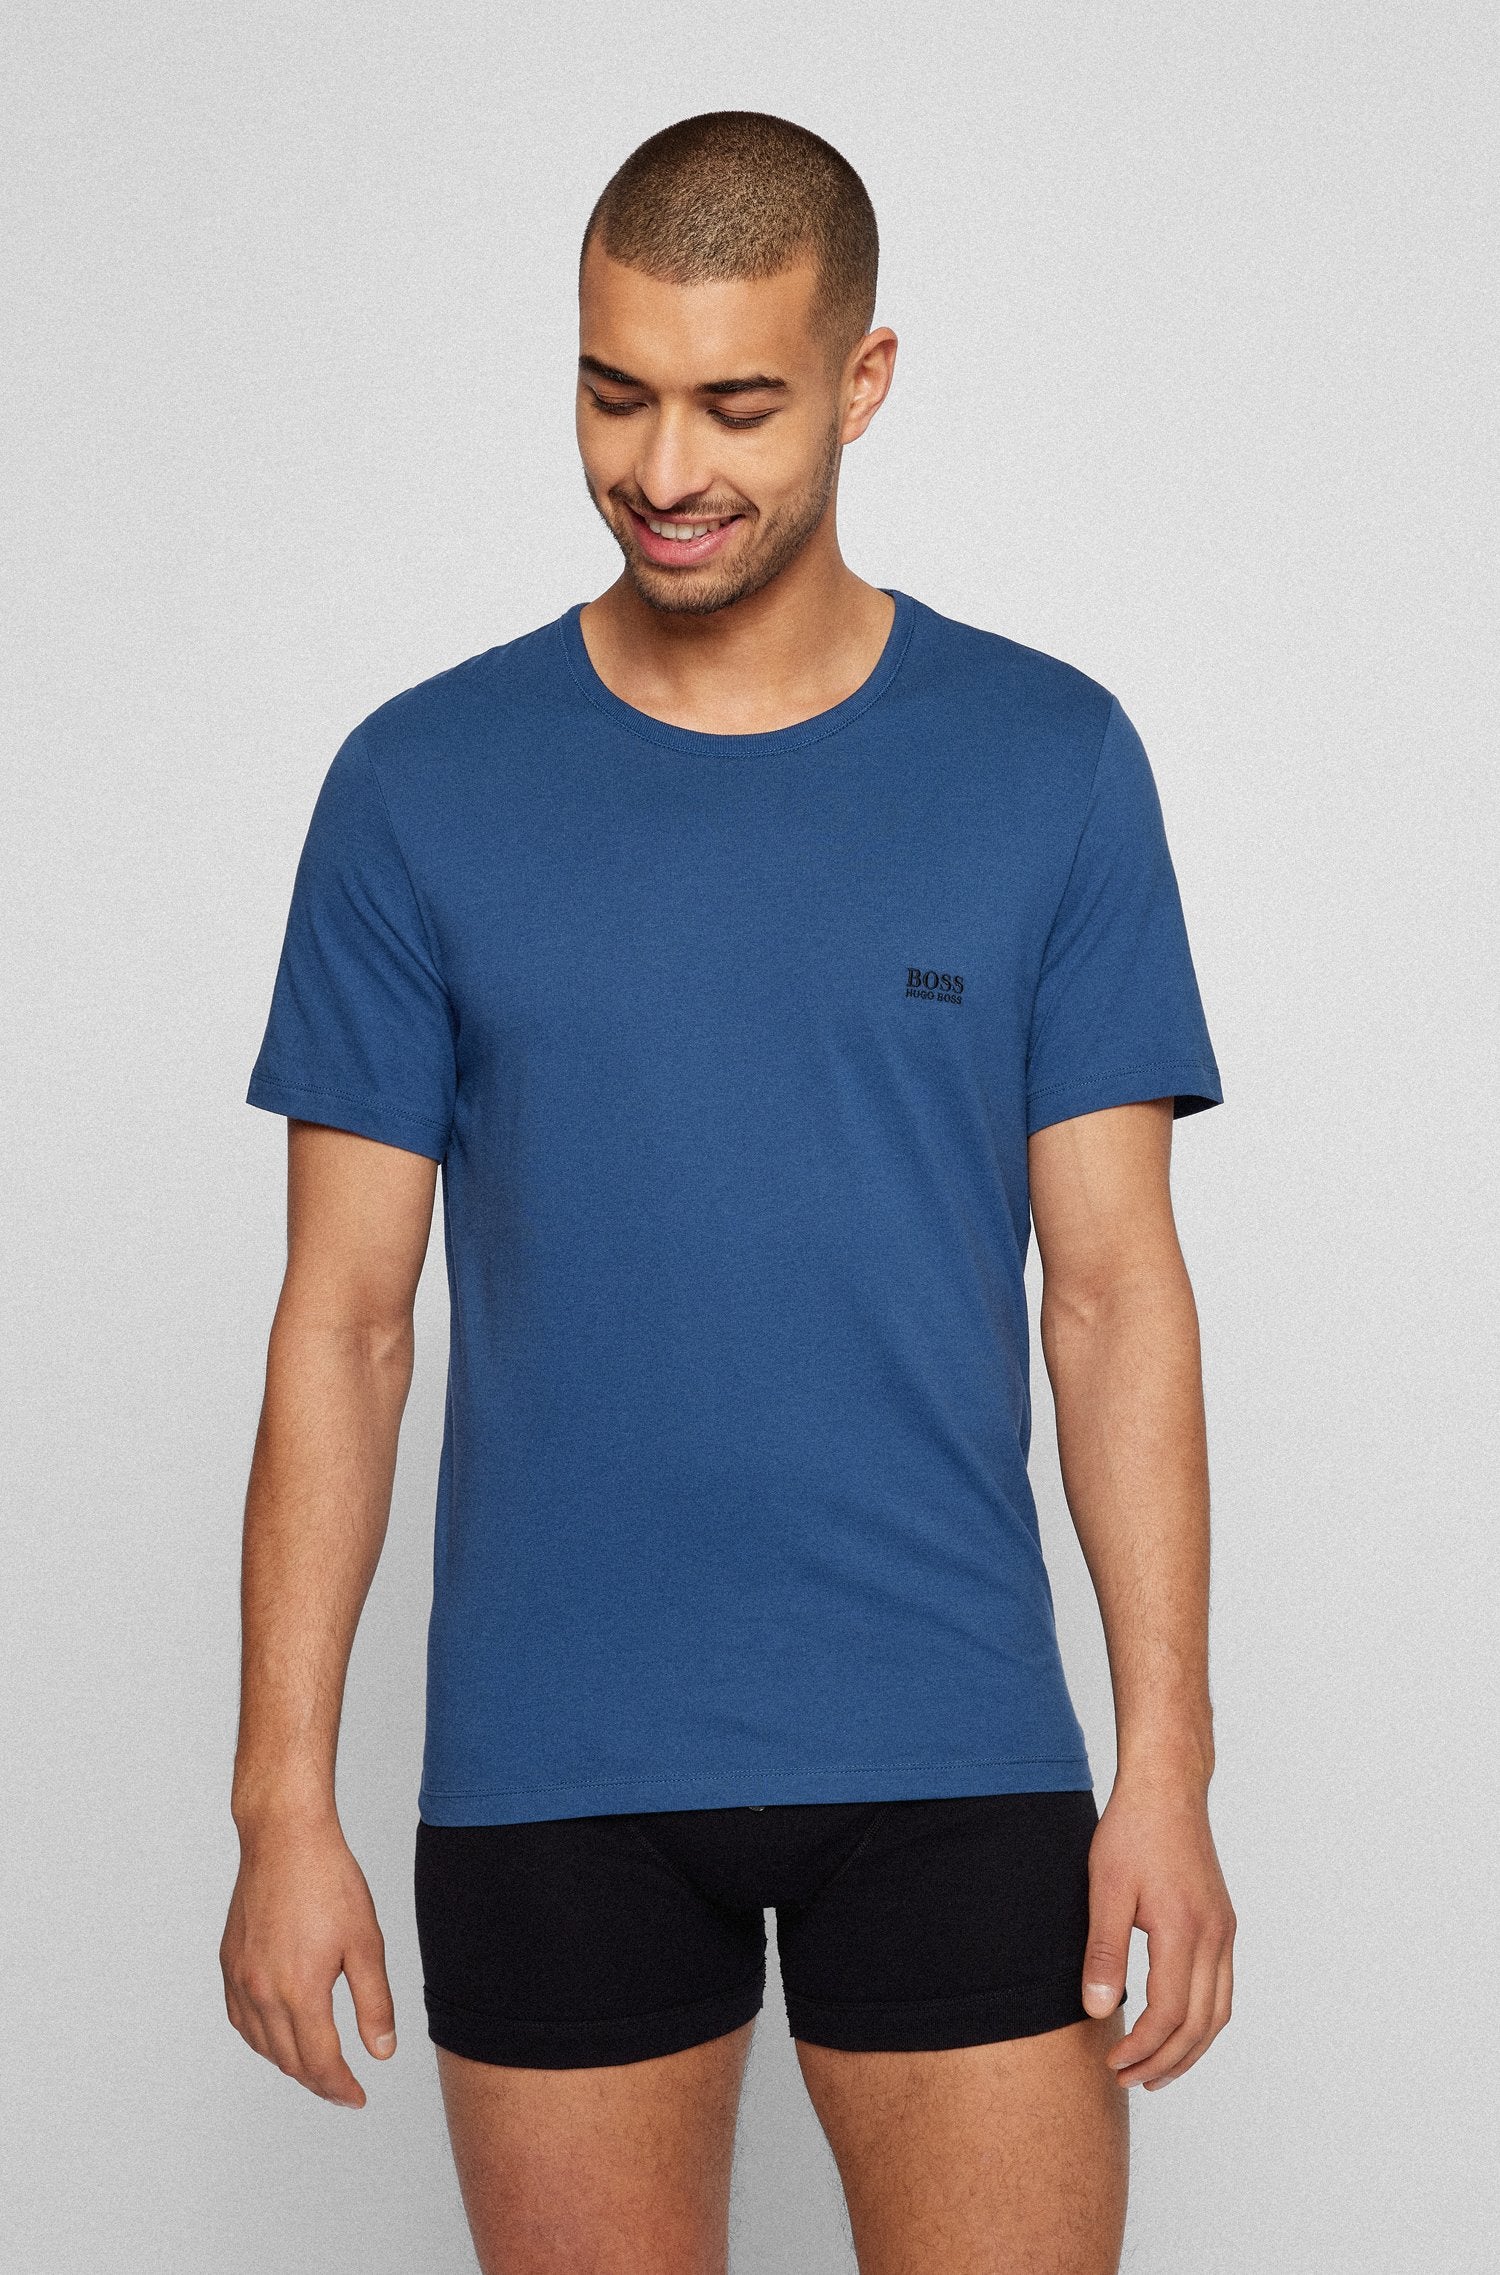 BOSS - 3-Pack Of Boxed Regular-Fit Cotton T-Shirts in Seasonal Colours 50325887 974